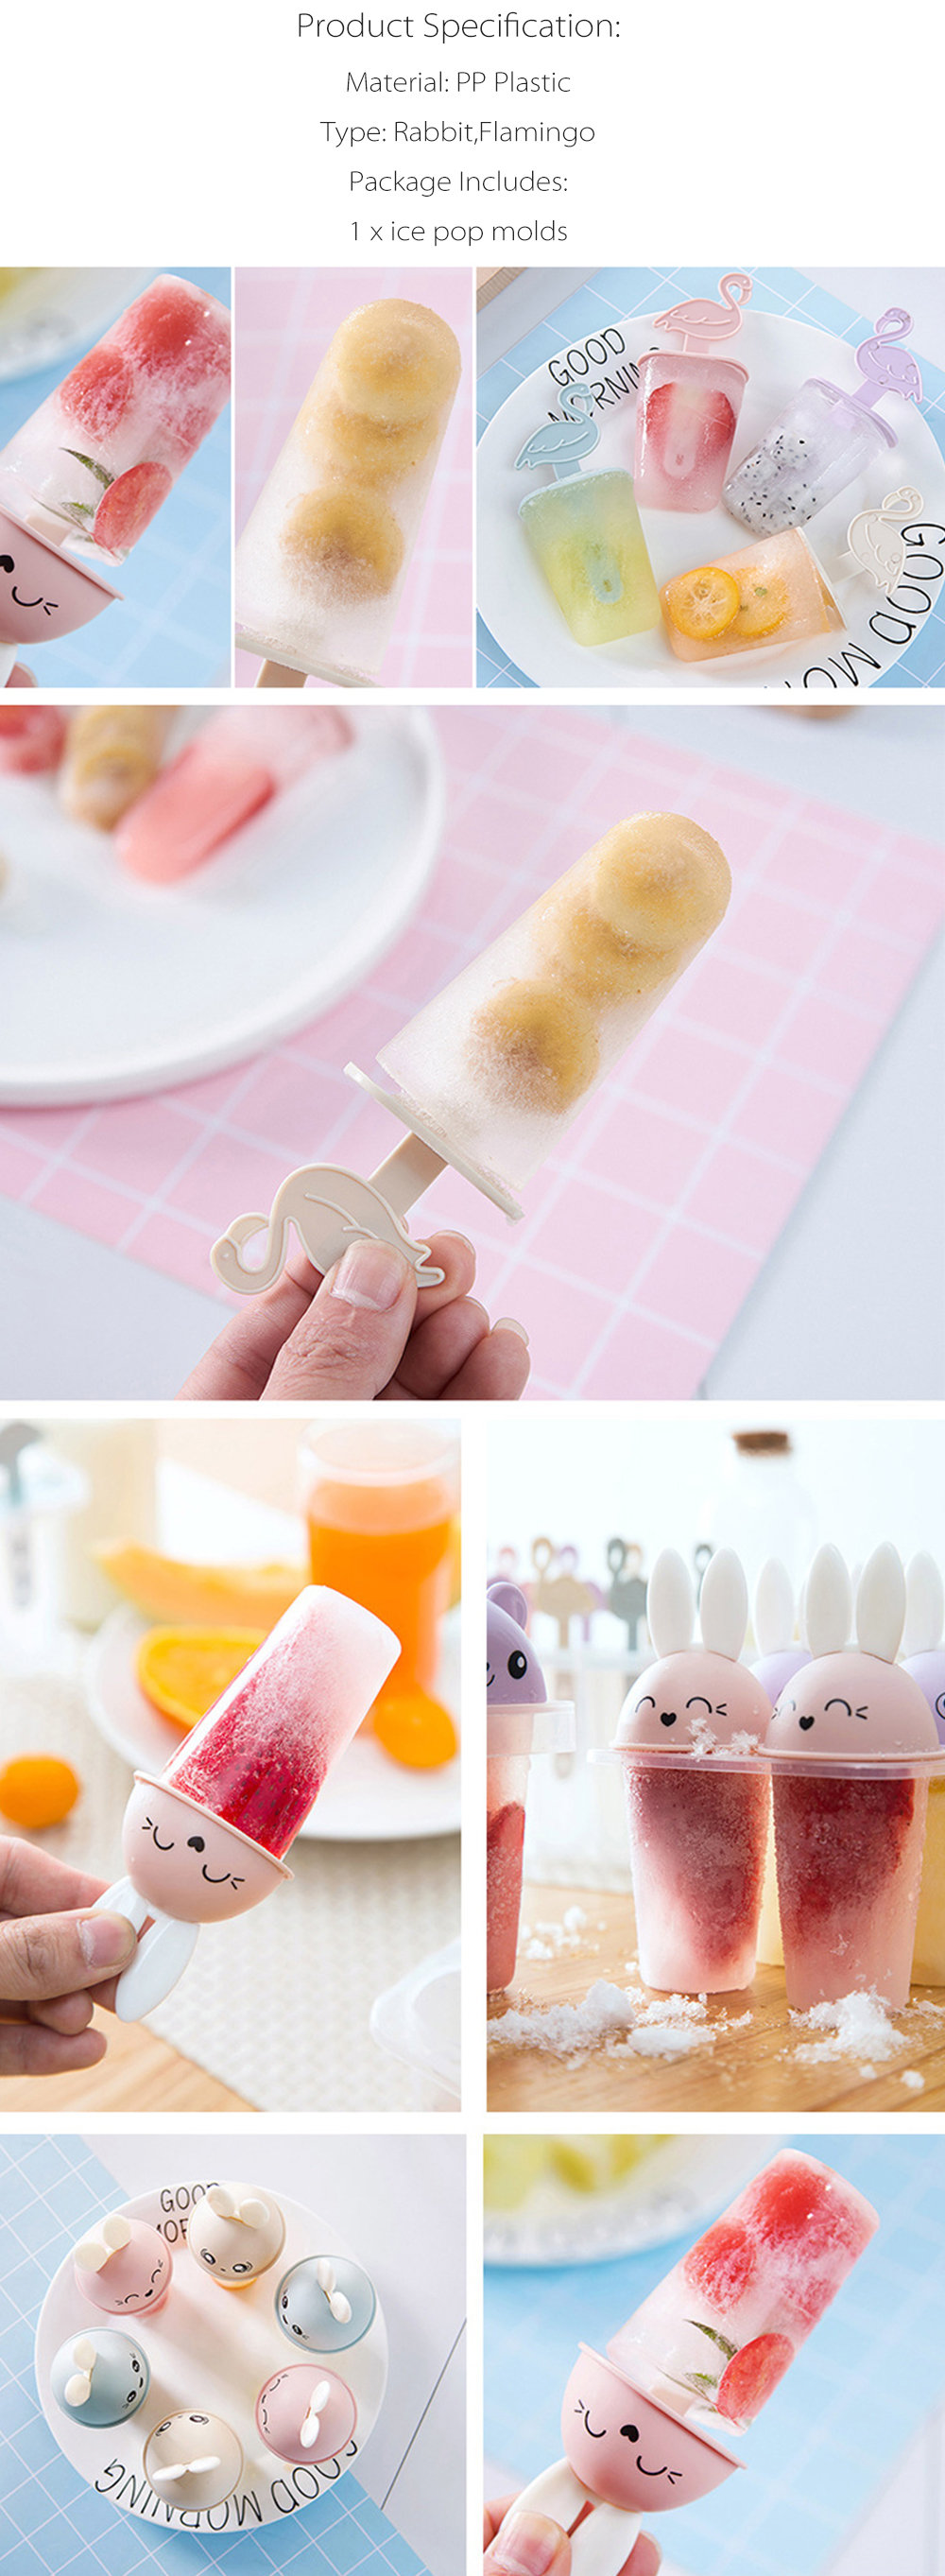 3 Sets of Popsicle Molds With 60 Sticks Cute Animals Cake POP Mold Ice Tray  With Lids 